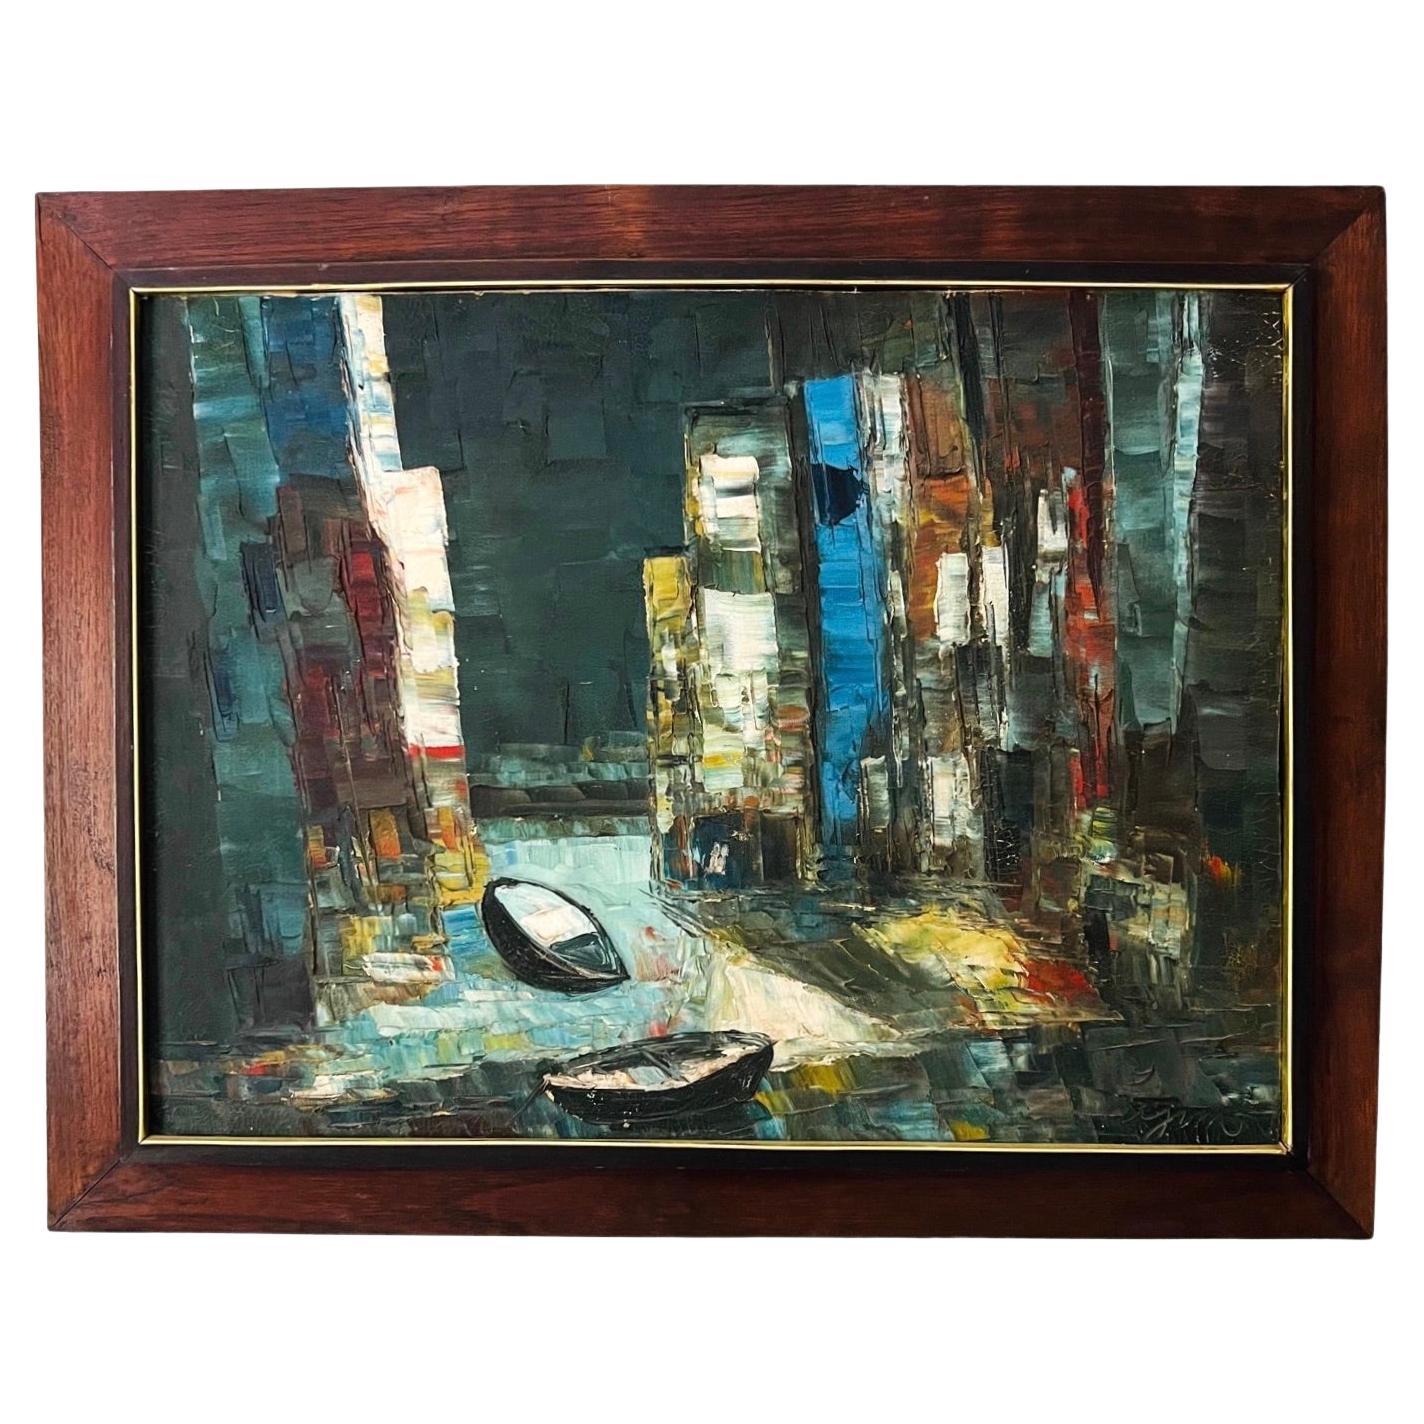 Abstract Painting in Original Wood Frame, Rowboats Oil on Board, c. 1950s